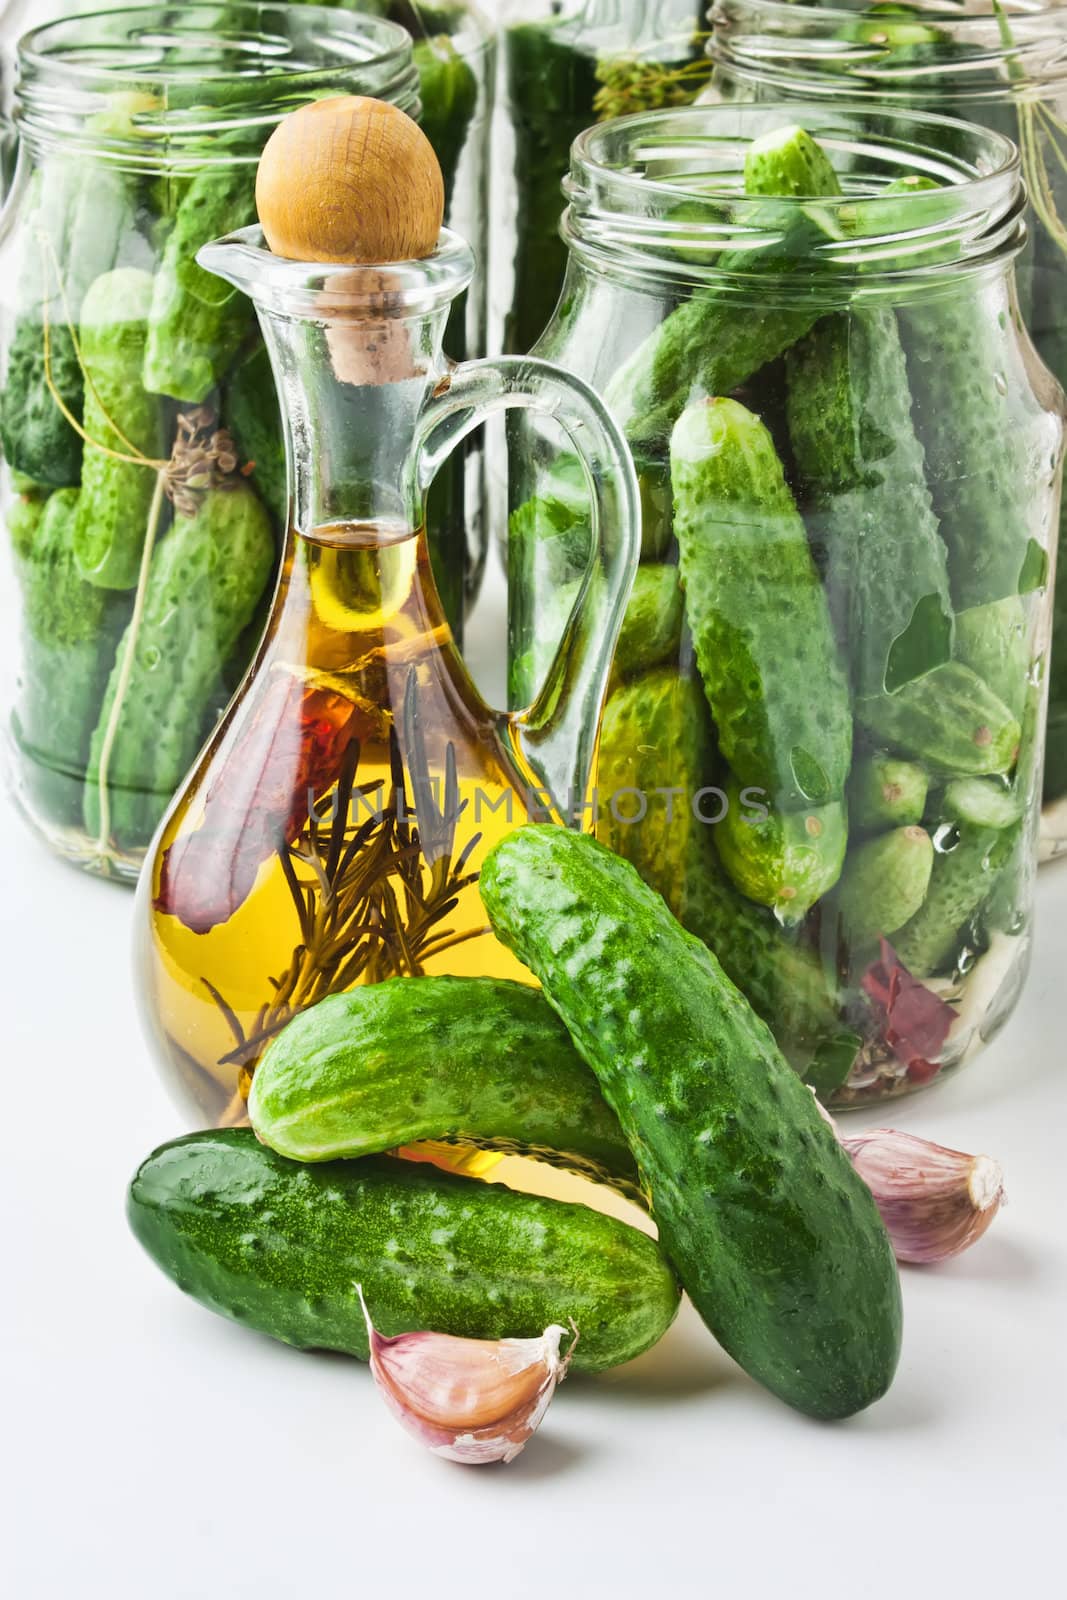 harvesting and canning cucumbers for winter